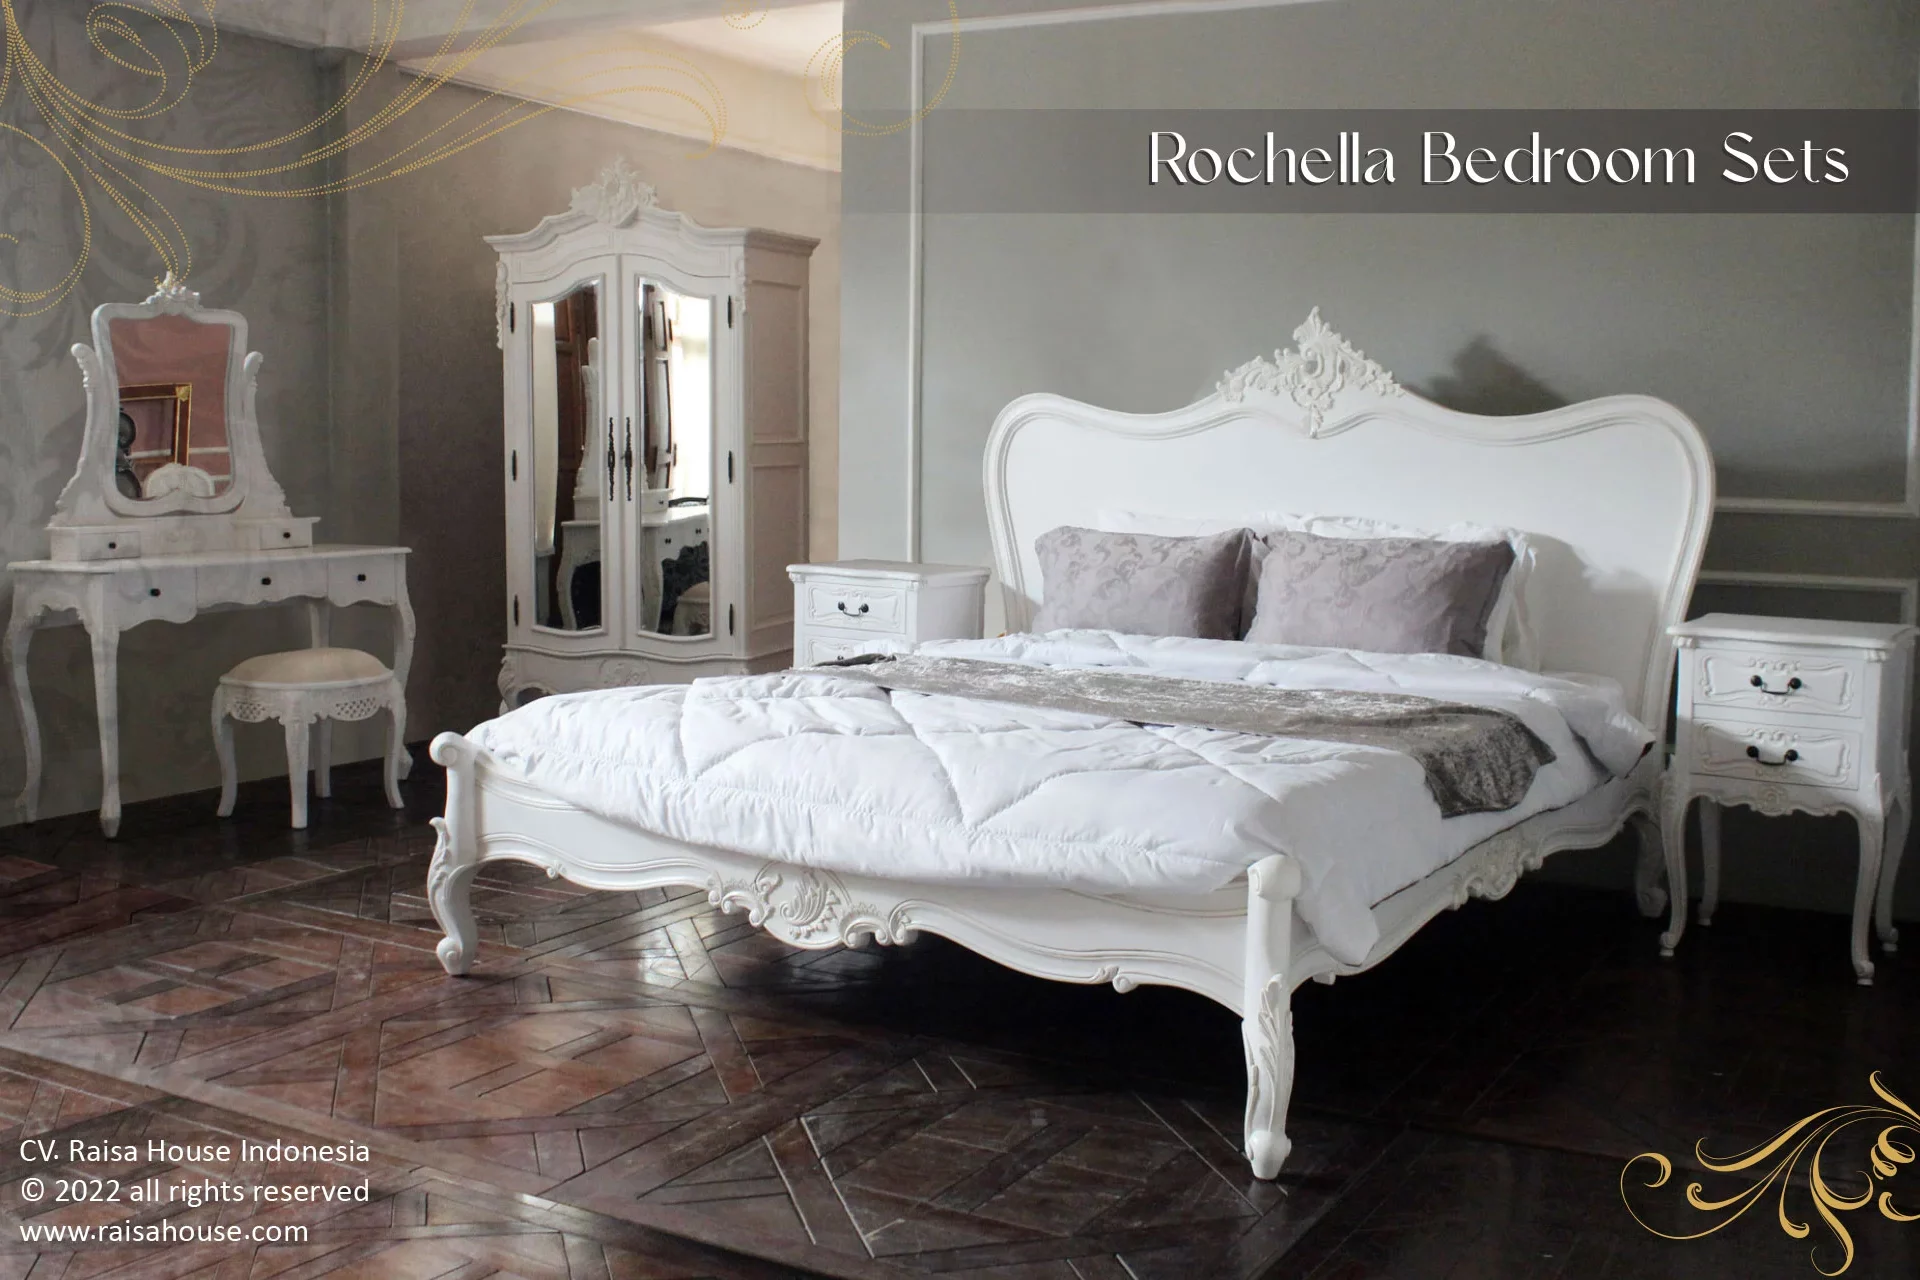 Rochella bedroom sets french style & classic design